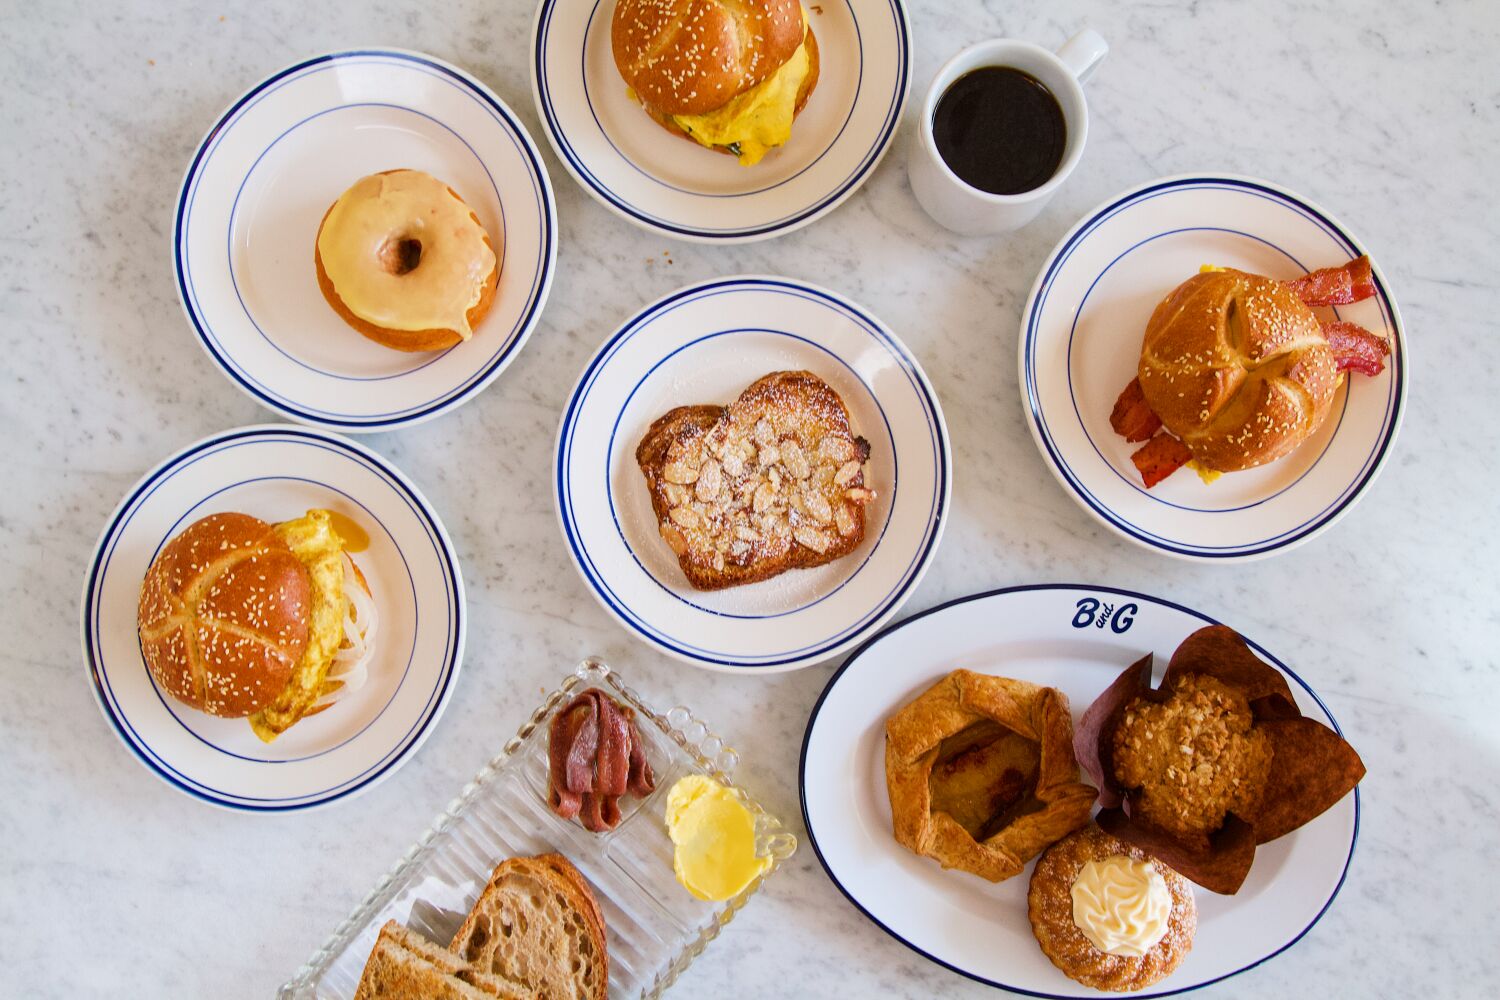 Bub and Grandma's new restaurant expands the lauded bakery into an all-day diner